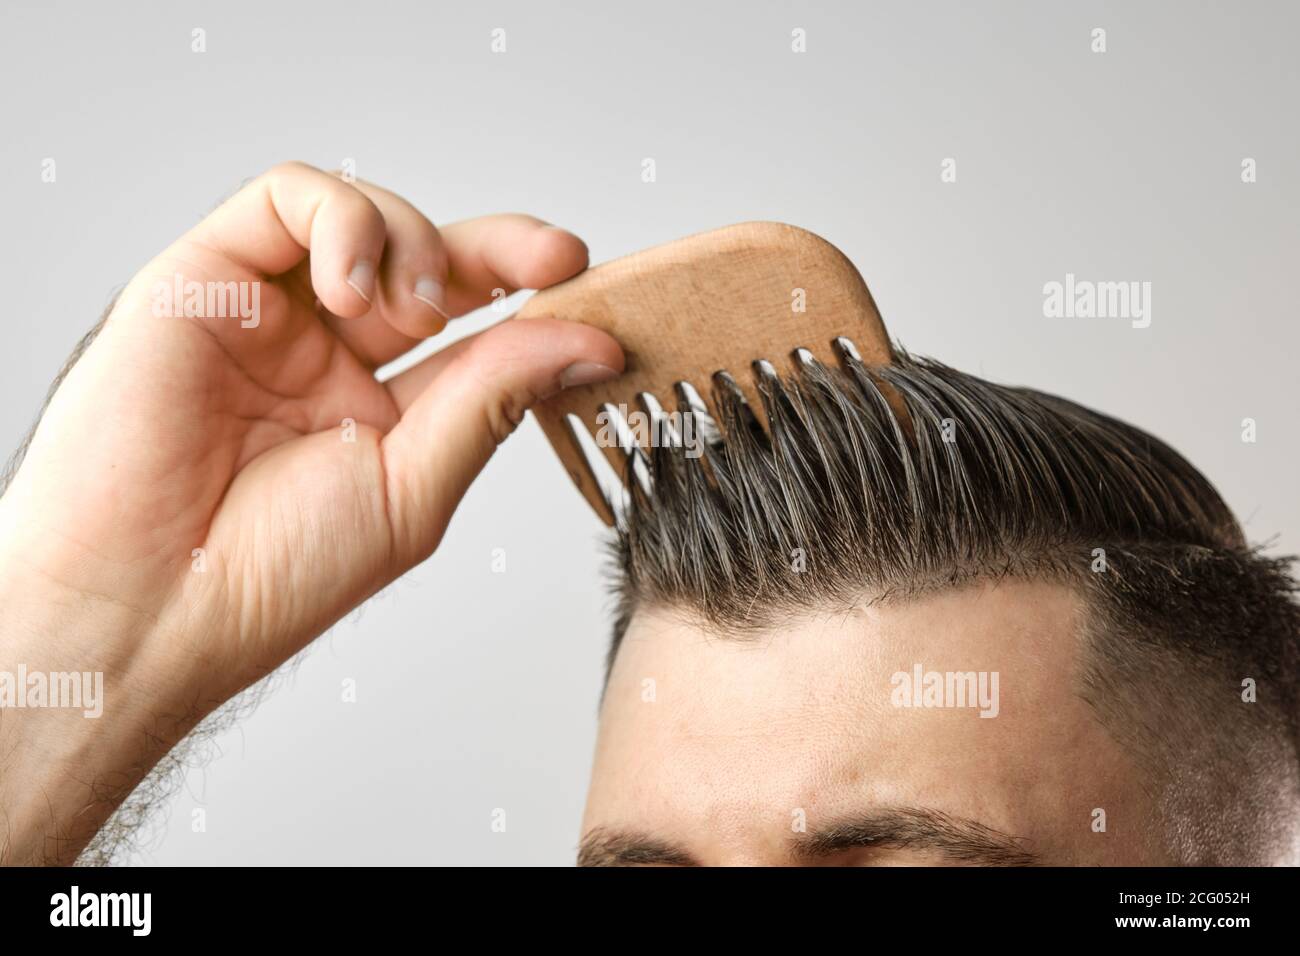 Close up man brushing his hair with wooden comb on the grey background.  Treatment against hair lost and dandruff concept. Cosmetic products for men  Stock Photo - Alamy